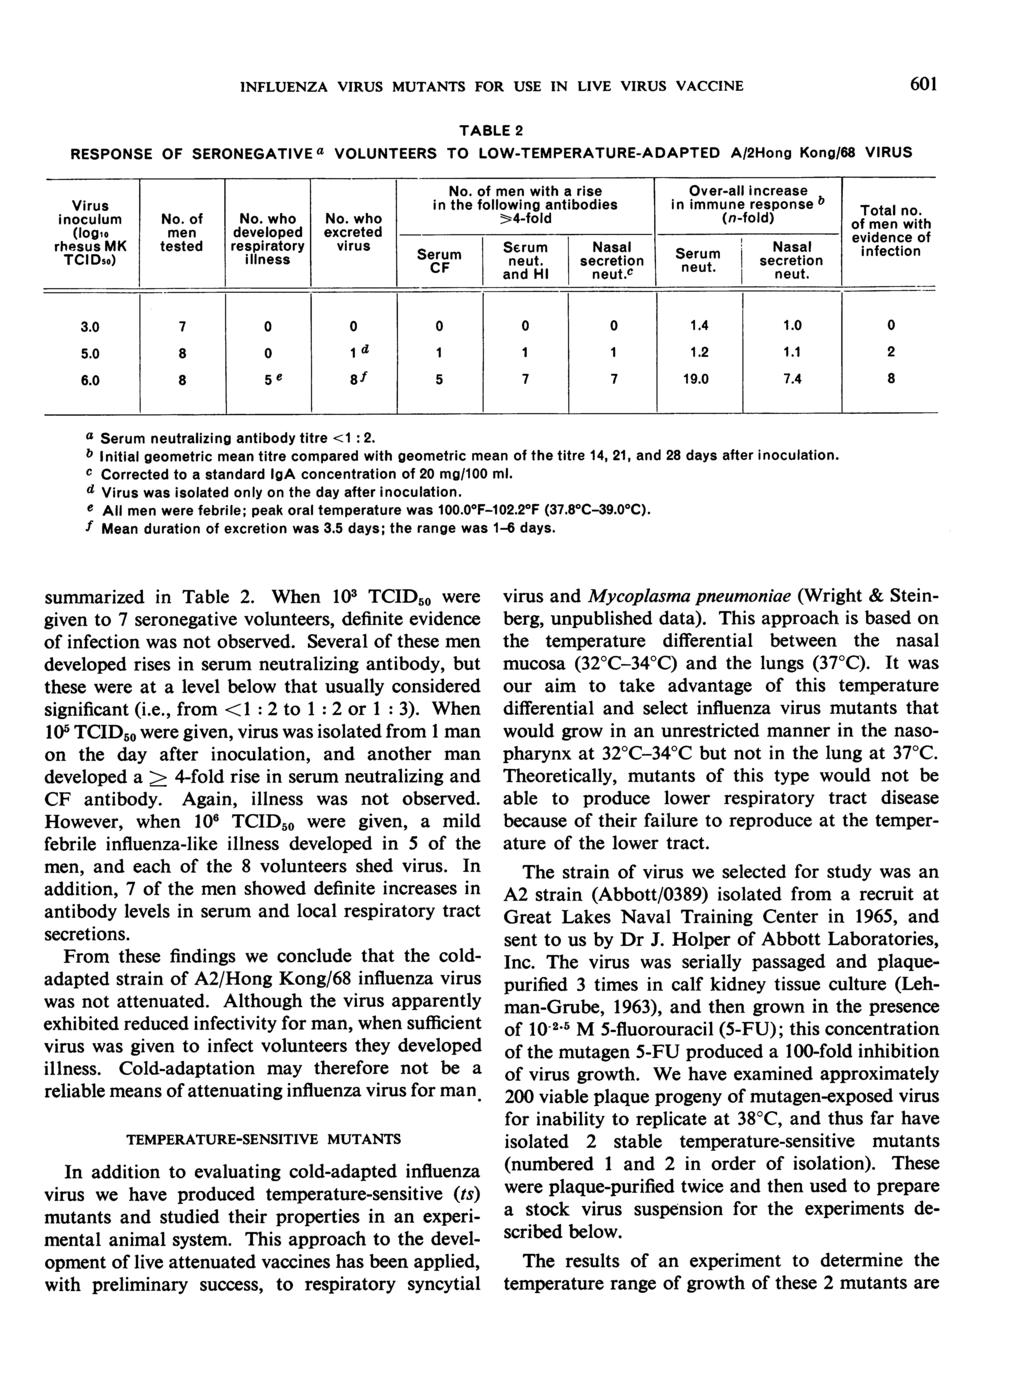 INFLUENZA VIRUS MUTANTS FOR USE IN LIVE VIRUS VACCINE 601 TABLE 2 RESPONSE OF SERONEGATIVE a VOLUNTEERS TO LOW-TEMPERATURE-ADAPTED A/2Hong Kong/68 VIRUS No.